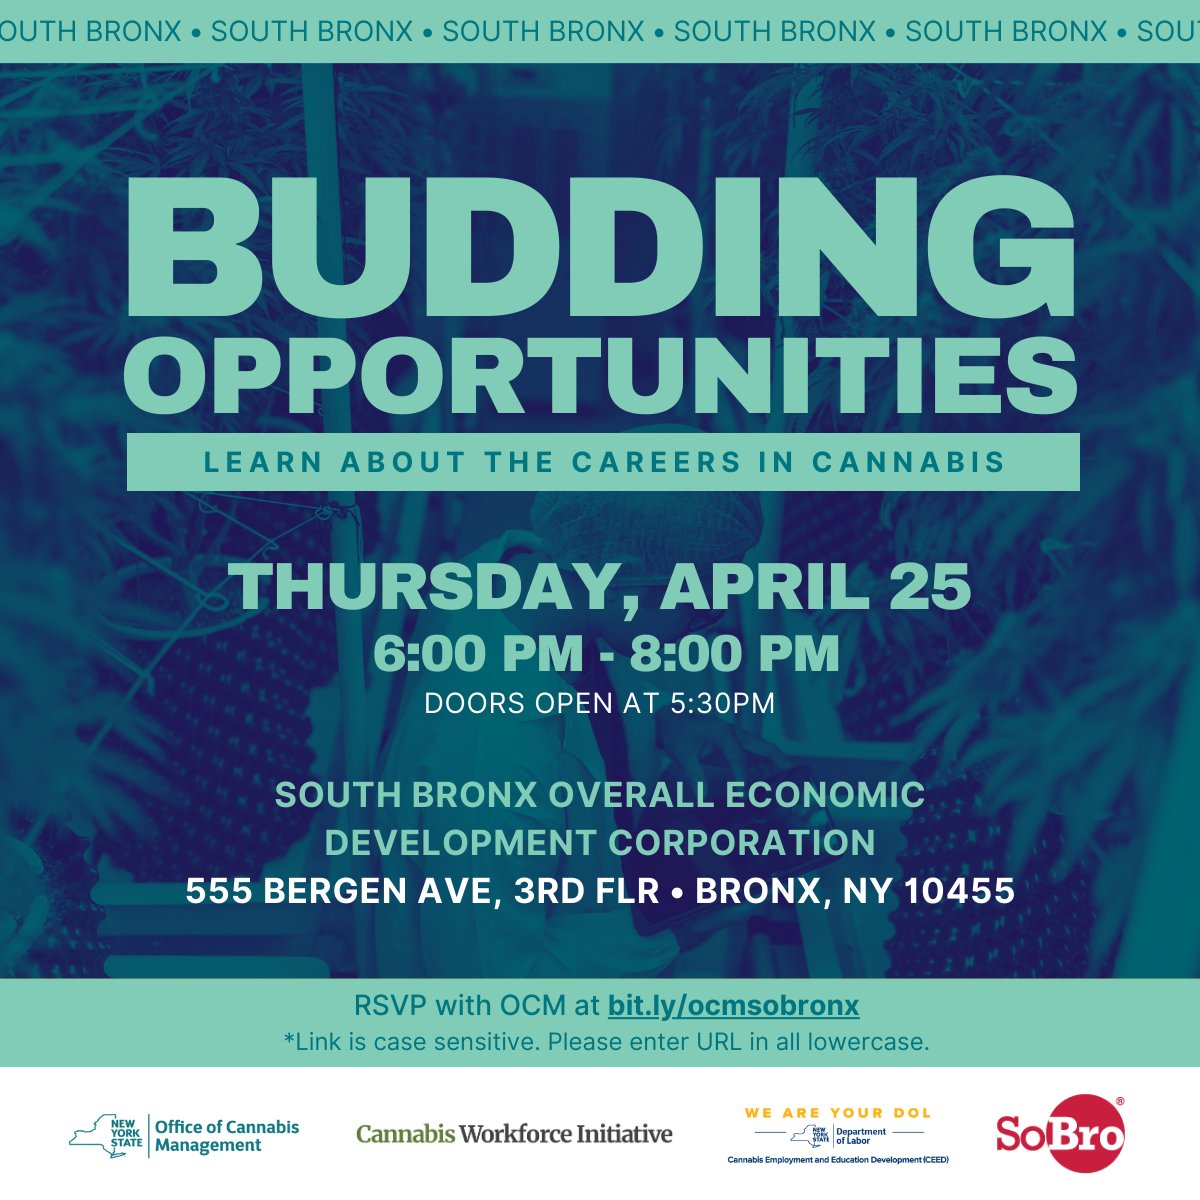 Interested in a career within #NYcannabis? Join us on Thu, 4/25 in the South Bronx to learn about possible positions and pathways within the cannabis industry. ➡️ Register here: bit.ly/ocmsobronx